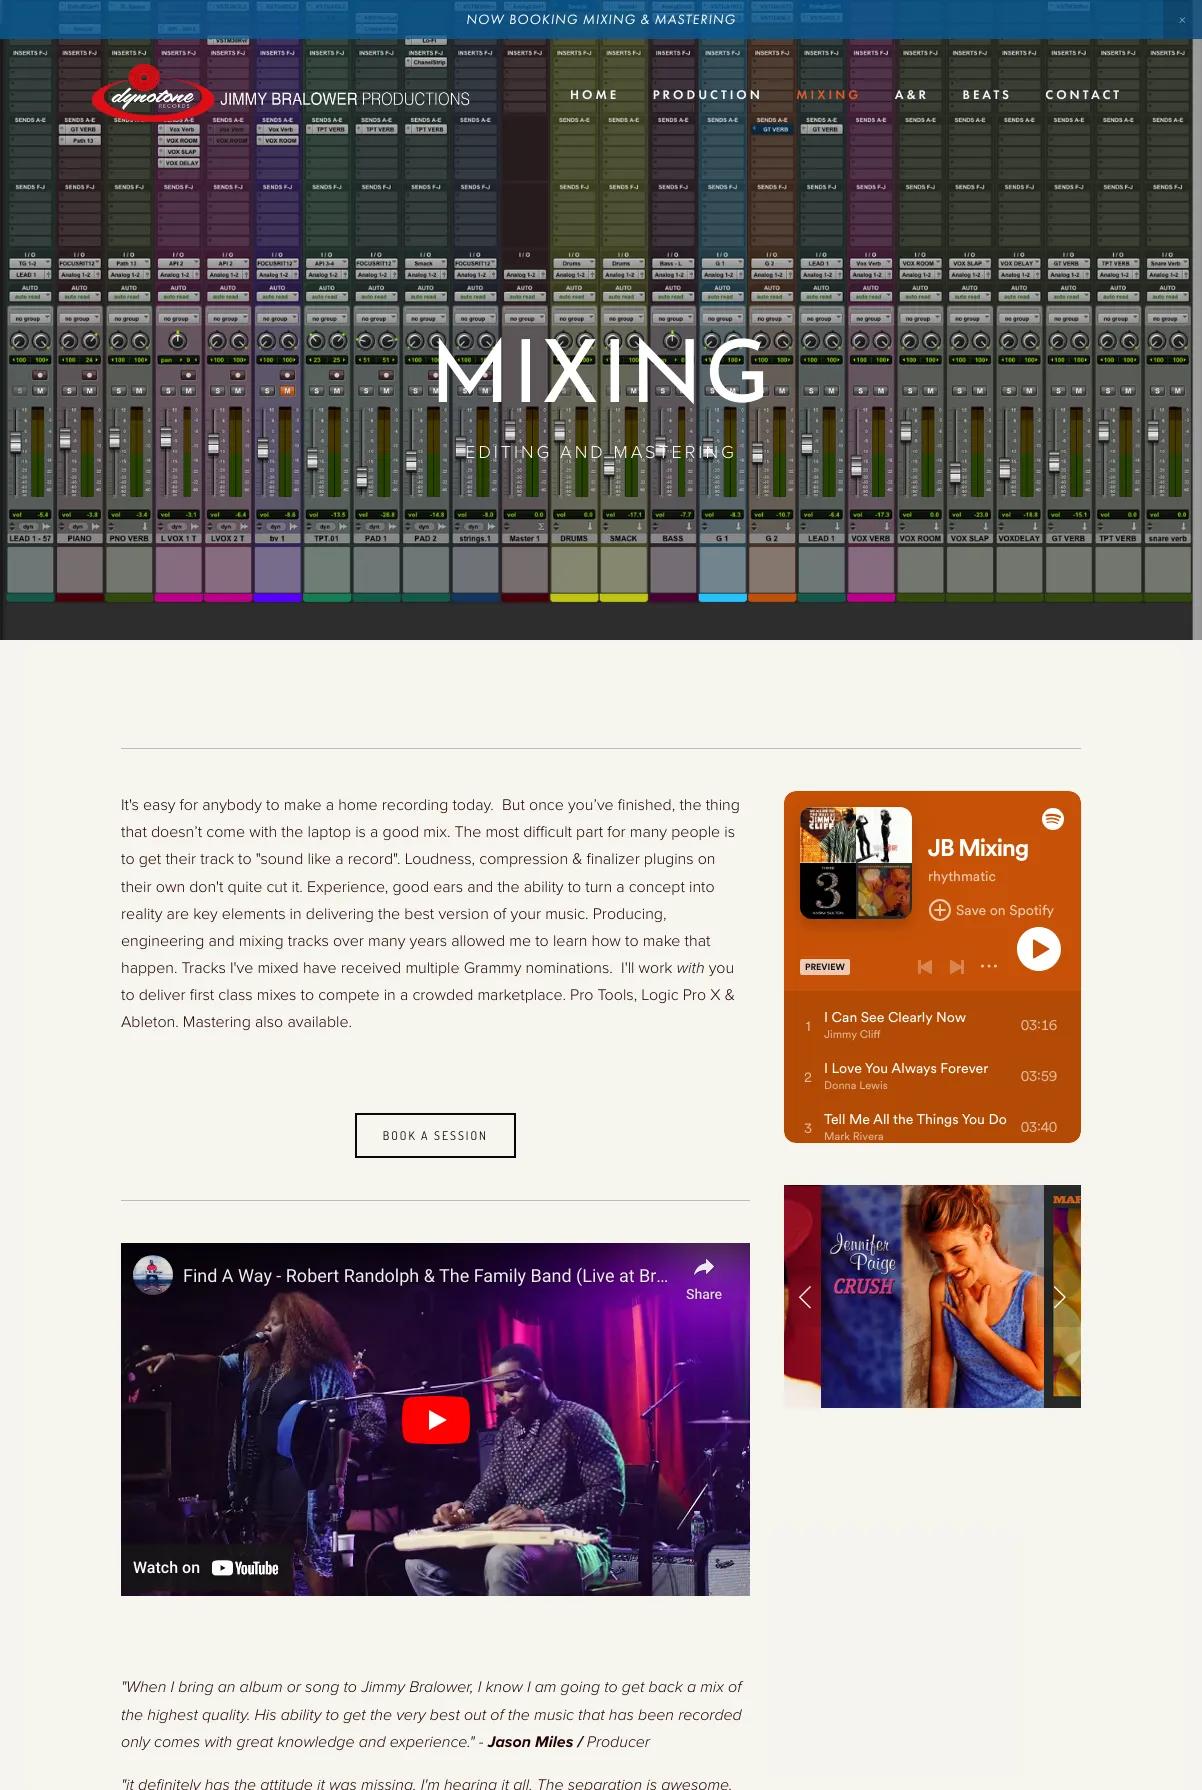 Screenshot 3 of Jimmy Bralower Productions (Example Squarespace Music Producer Website)